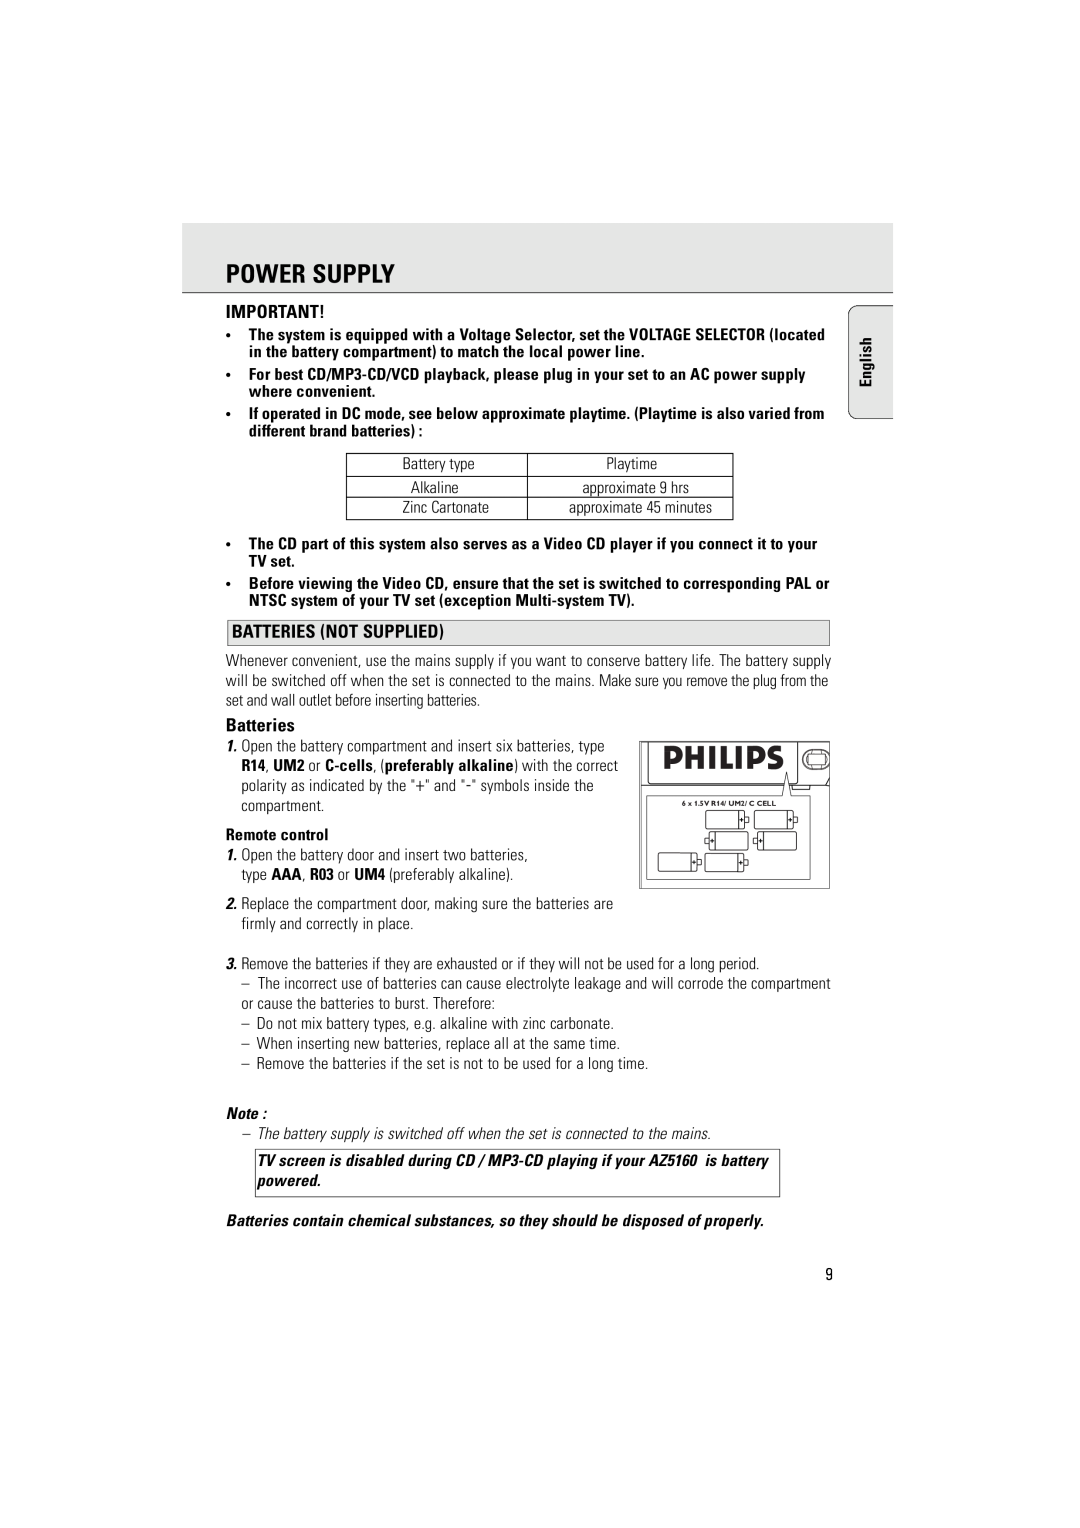 Philips AZ5160 user manual Power Supply, Batteries Not Supplied 